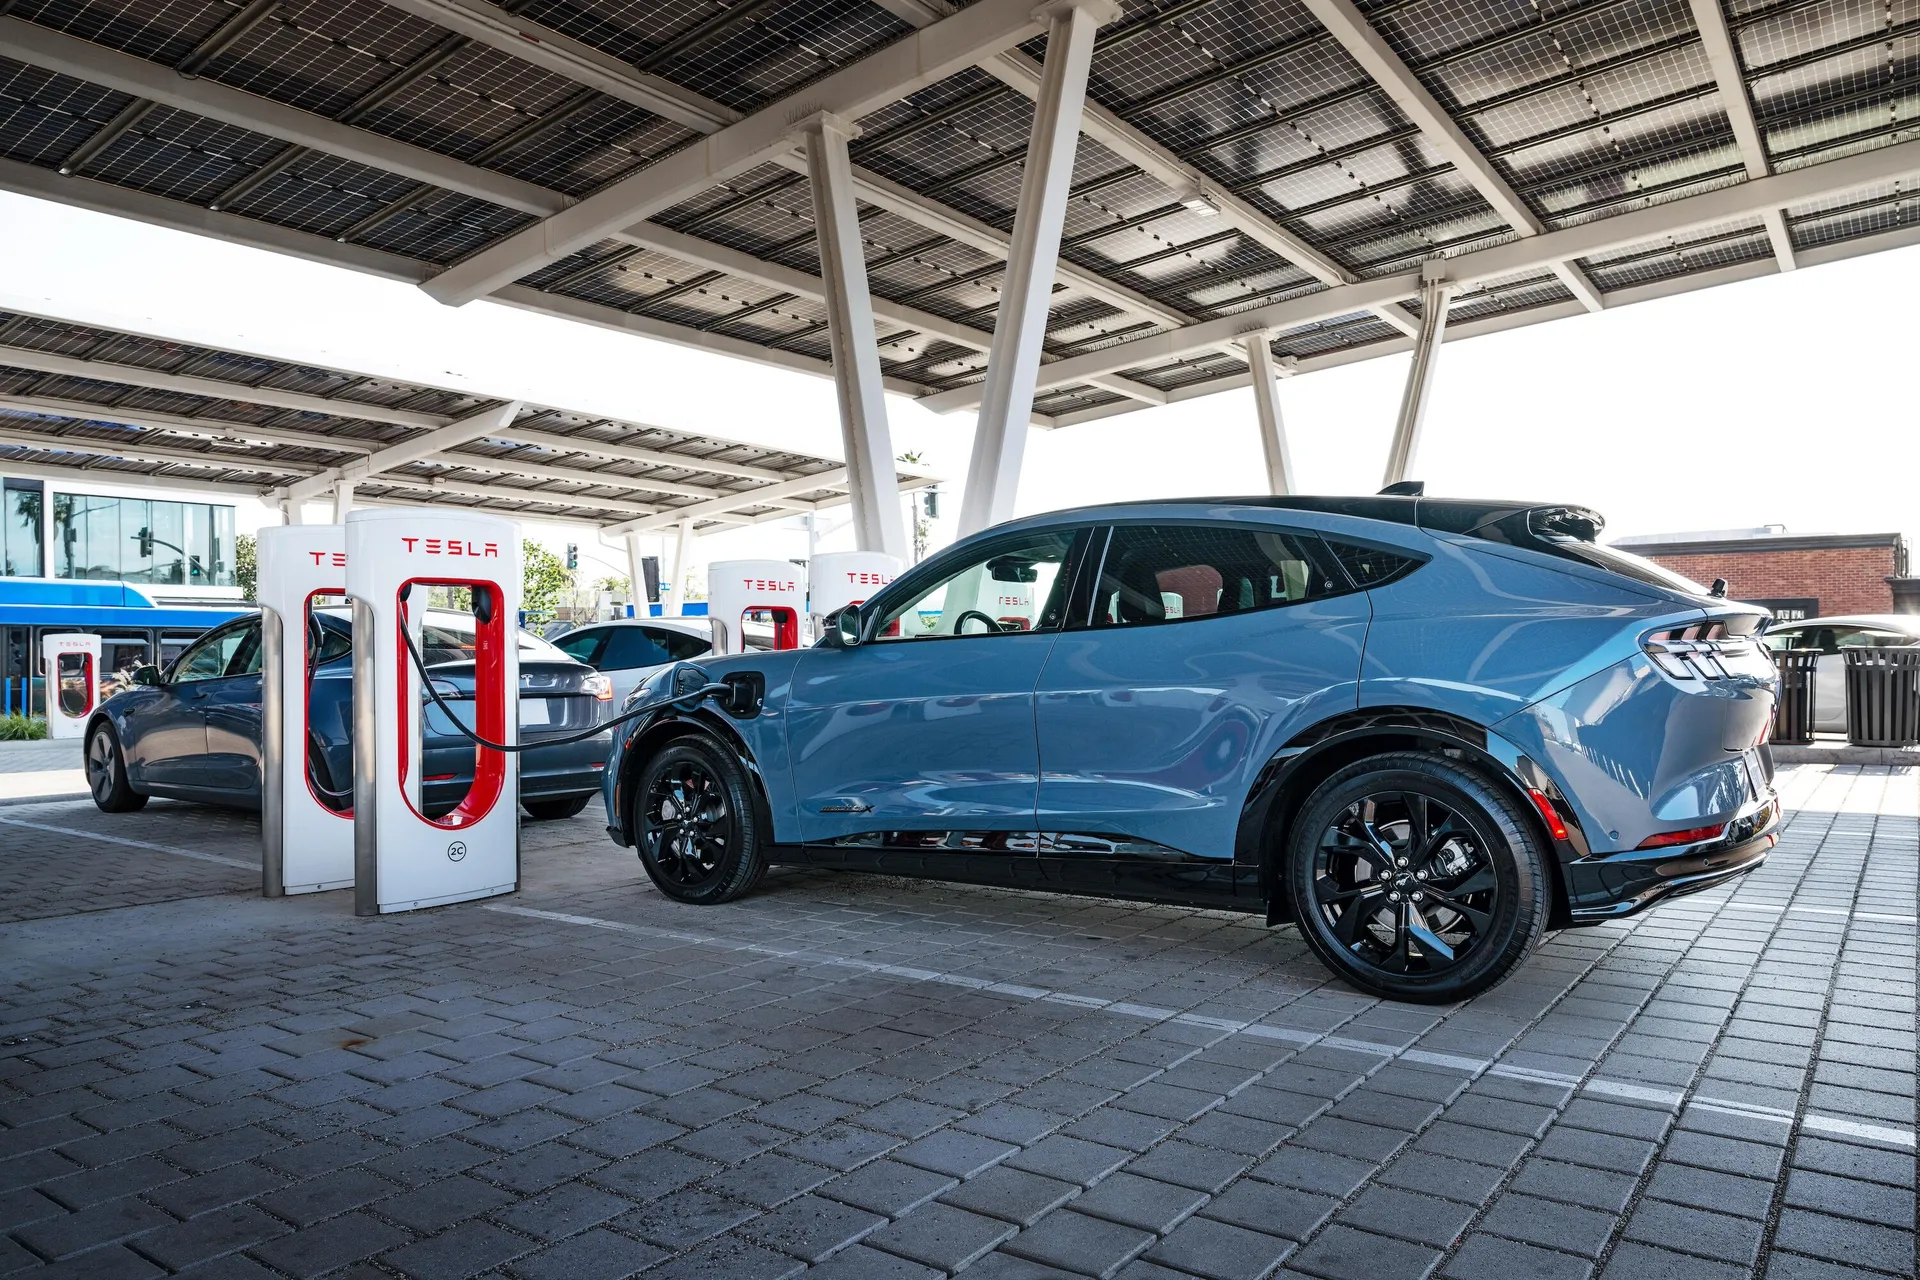 Ford's Electric Cars Get a Major Boost: Now Charging Up at Tesla Stations Across North America